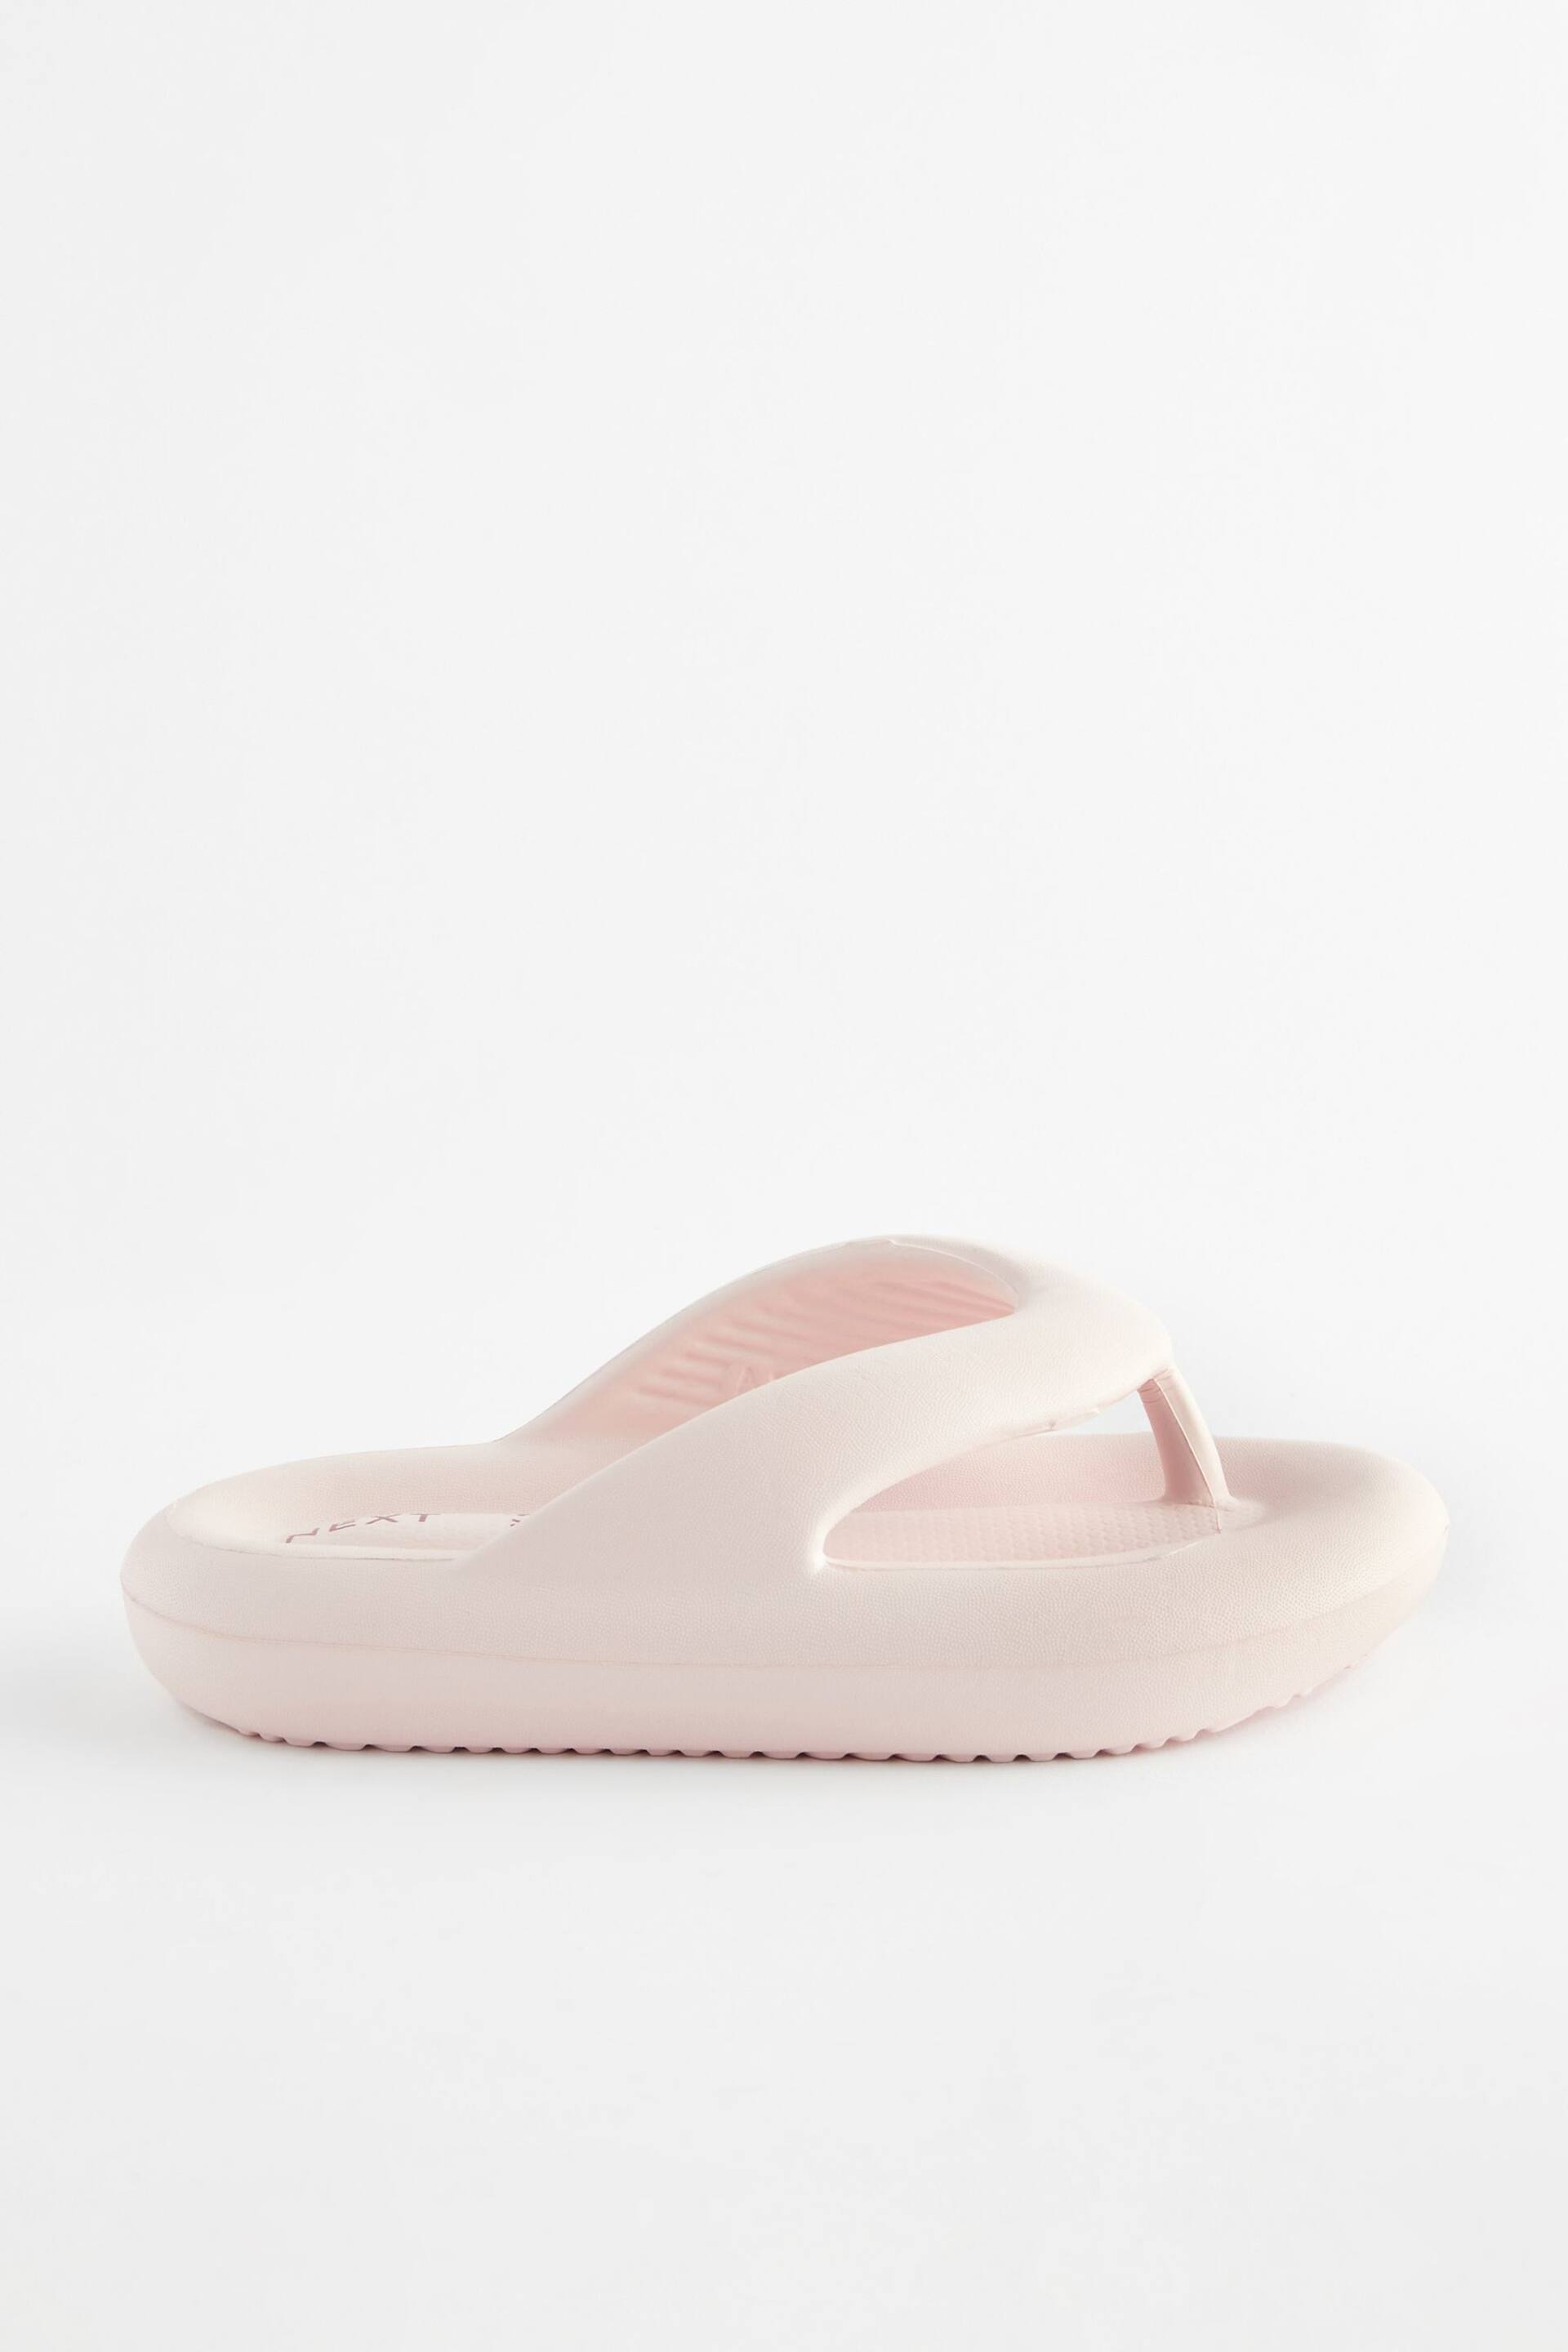 Pink Chunky Flip Flops - Image 3 of 6